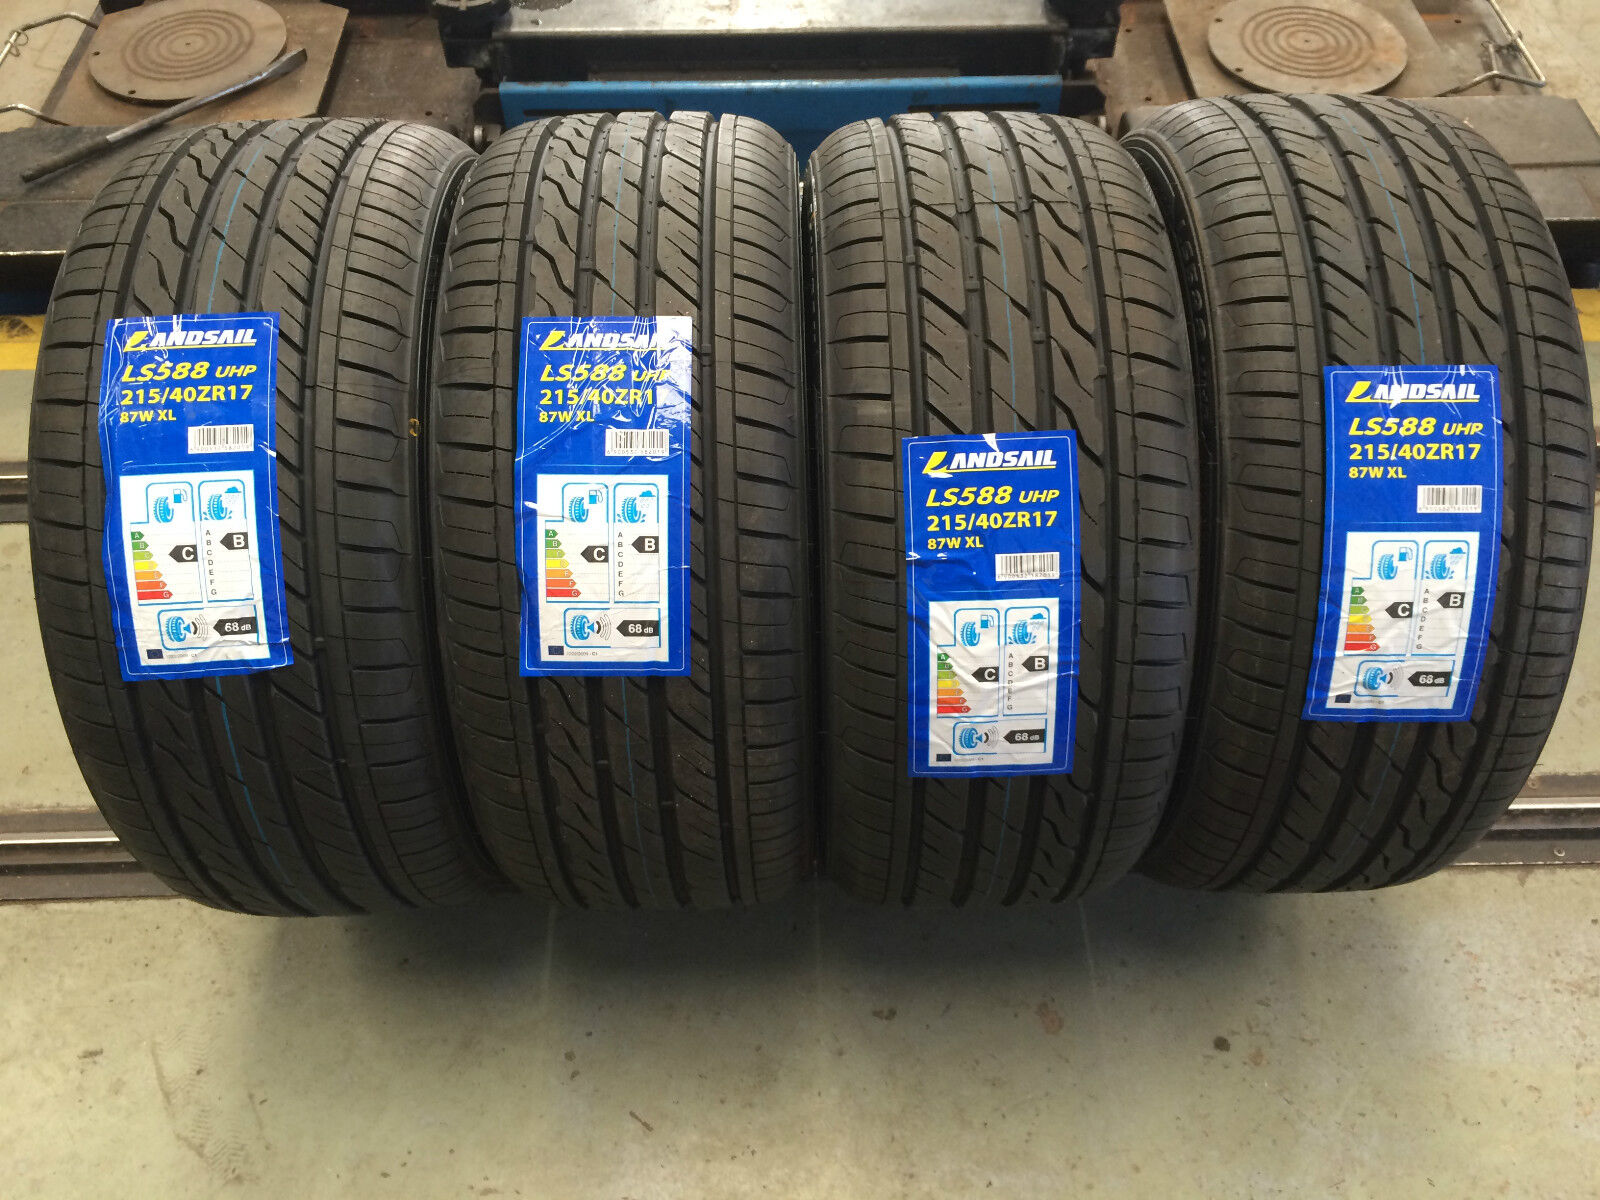 X4 215 40 17  87W XL LANDSAIL TYRES NEW WITH AMAZING C,B RATINGS  VERY CHEAP